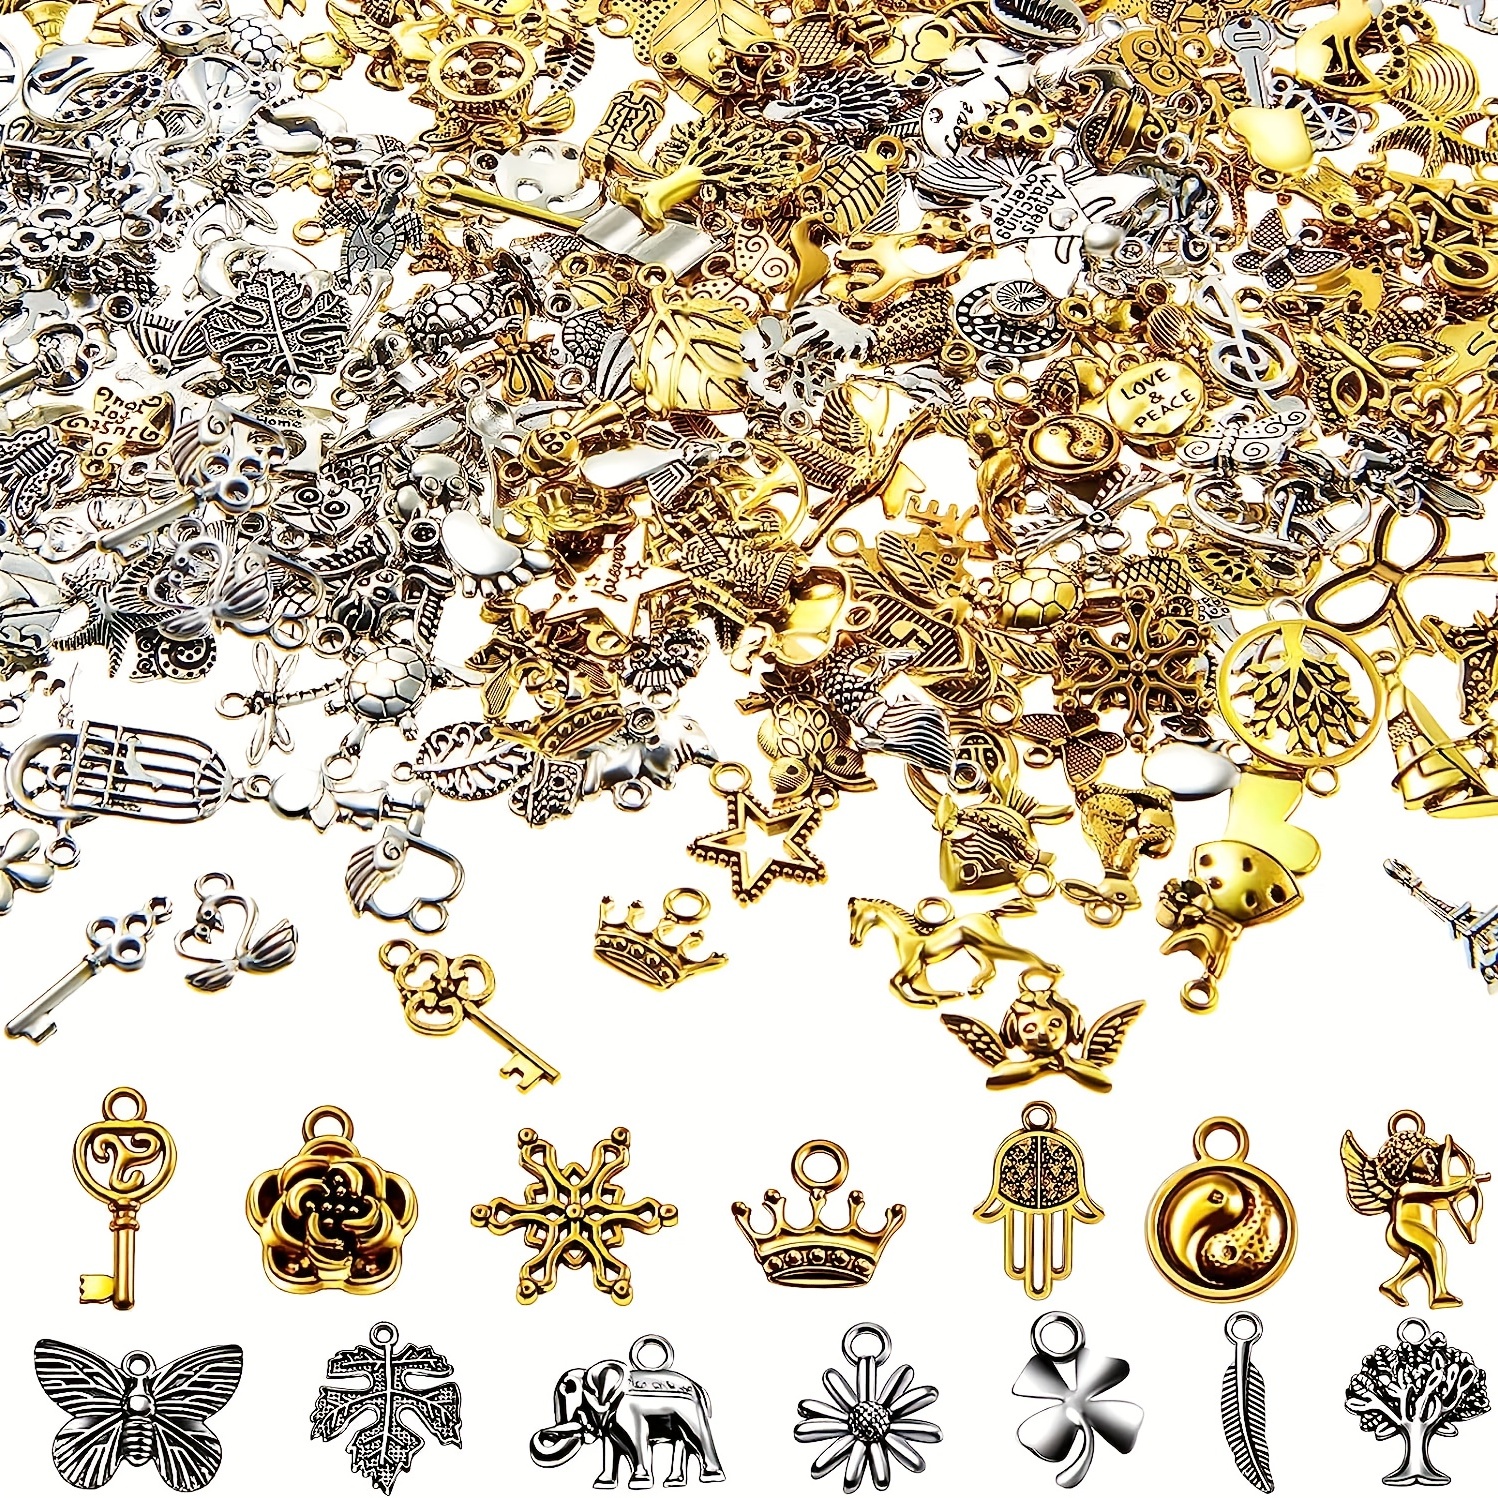 100pcs Wholesale Bulk Lots Jewelry Making Charms Assorted Gold